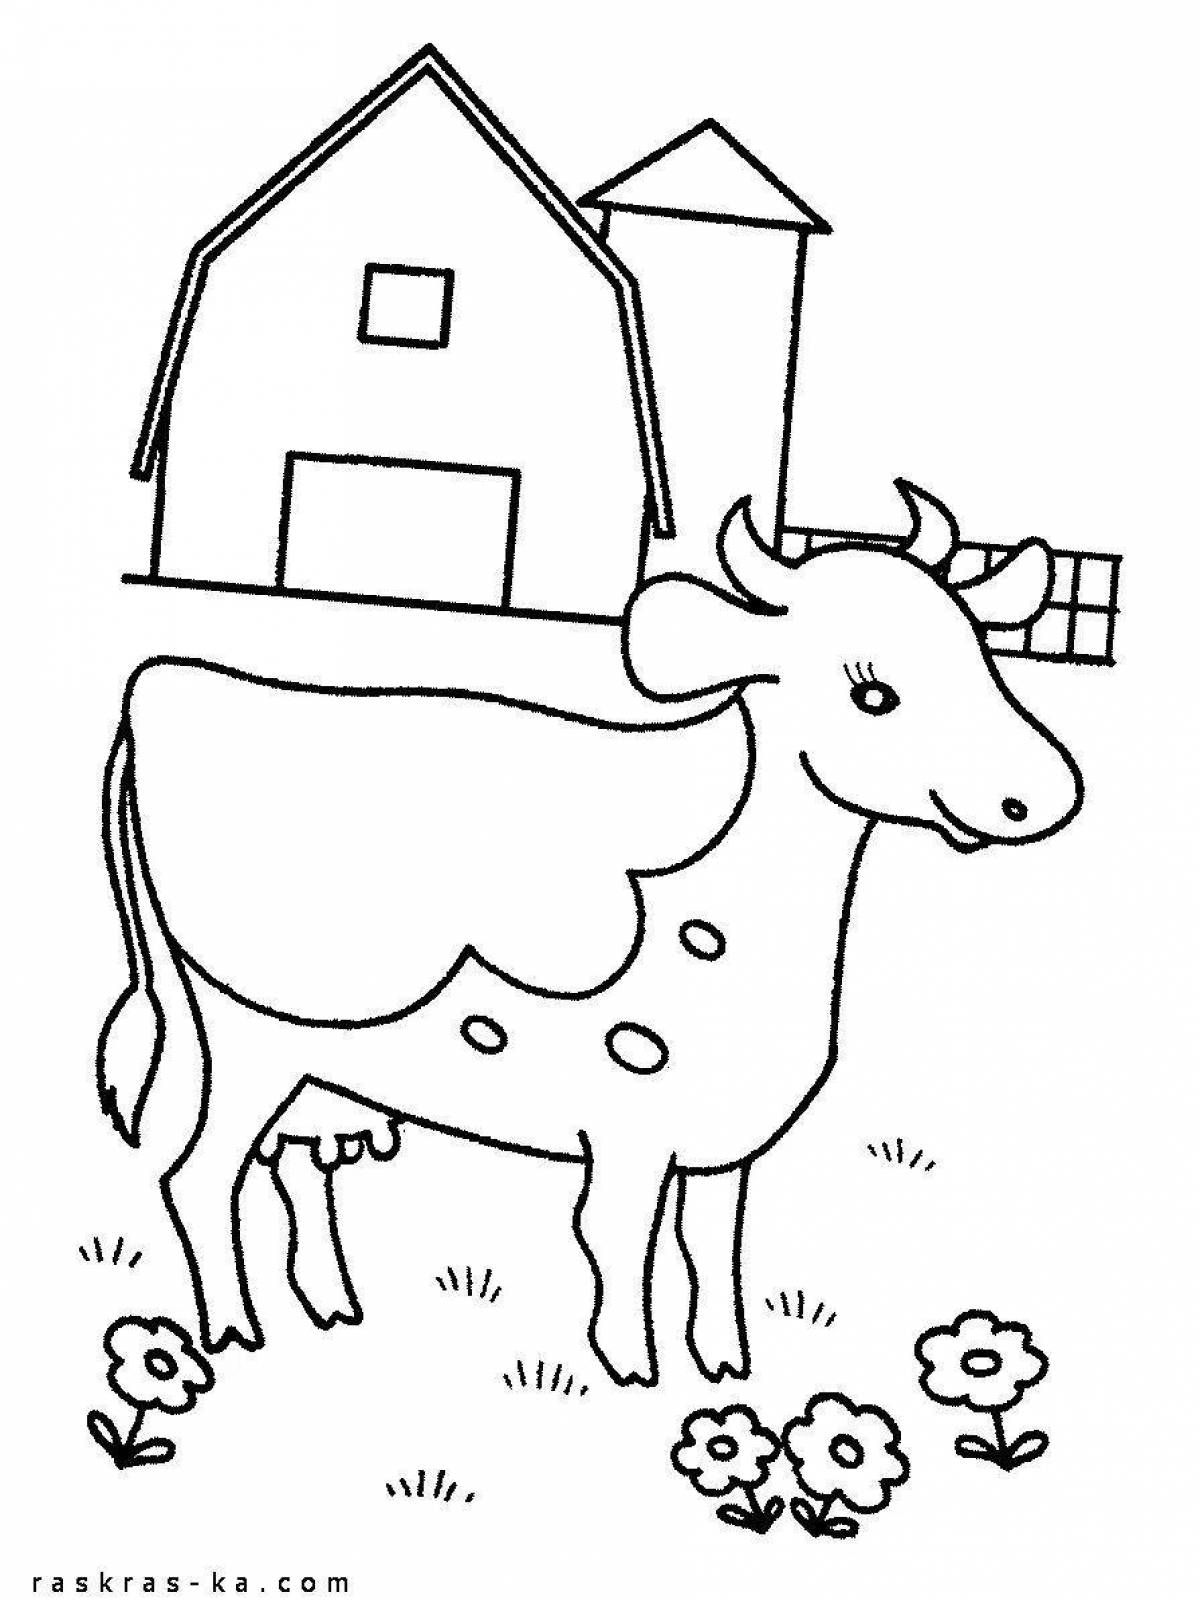 Coloring page shining village house